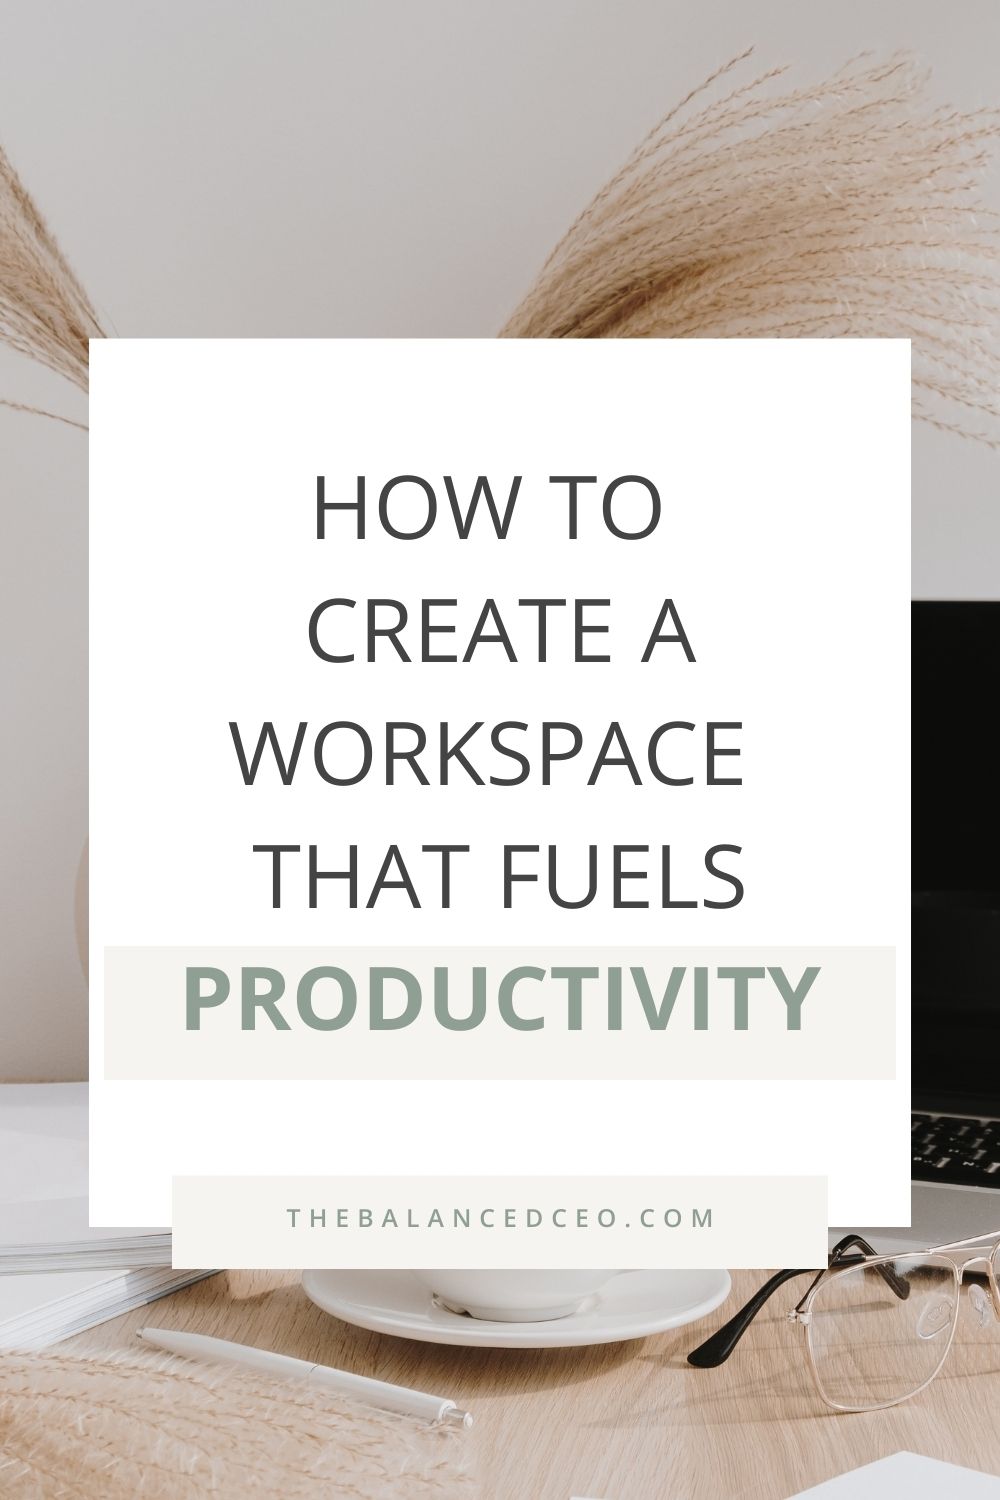 How to Create a Workspace that Fuels Productivity